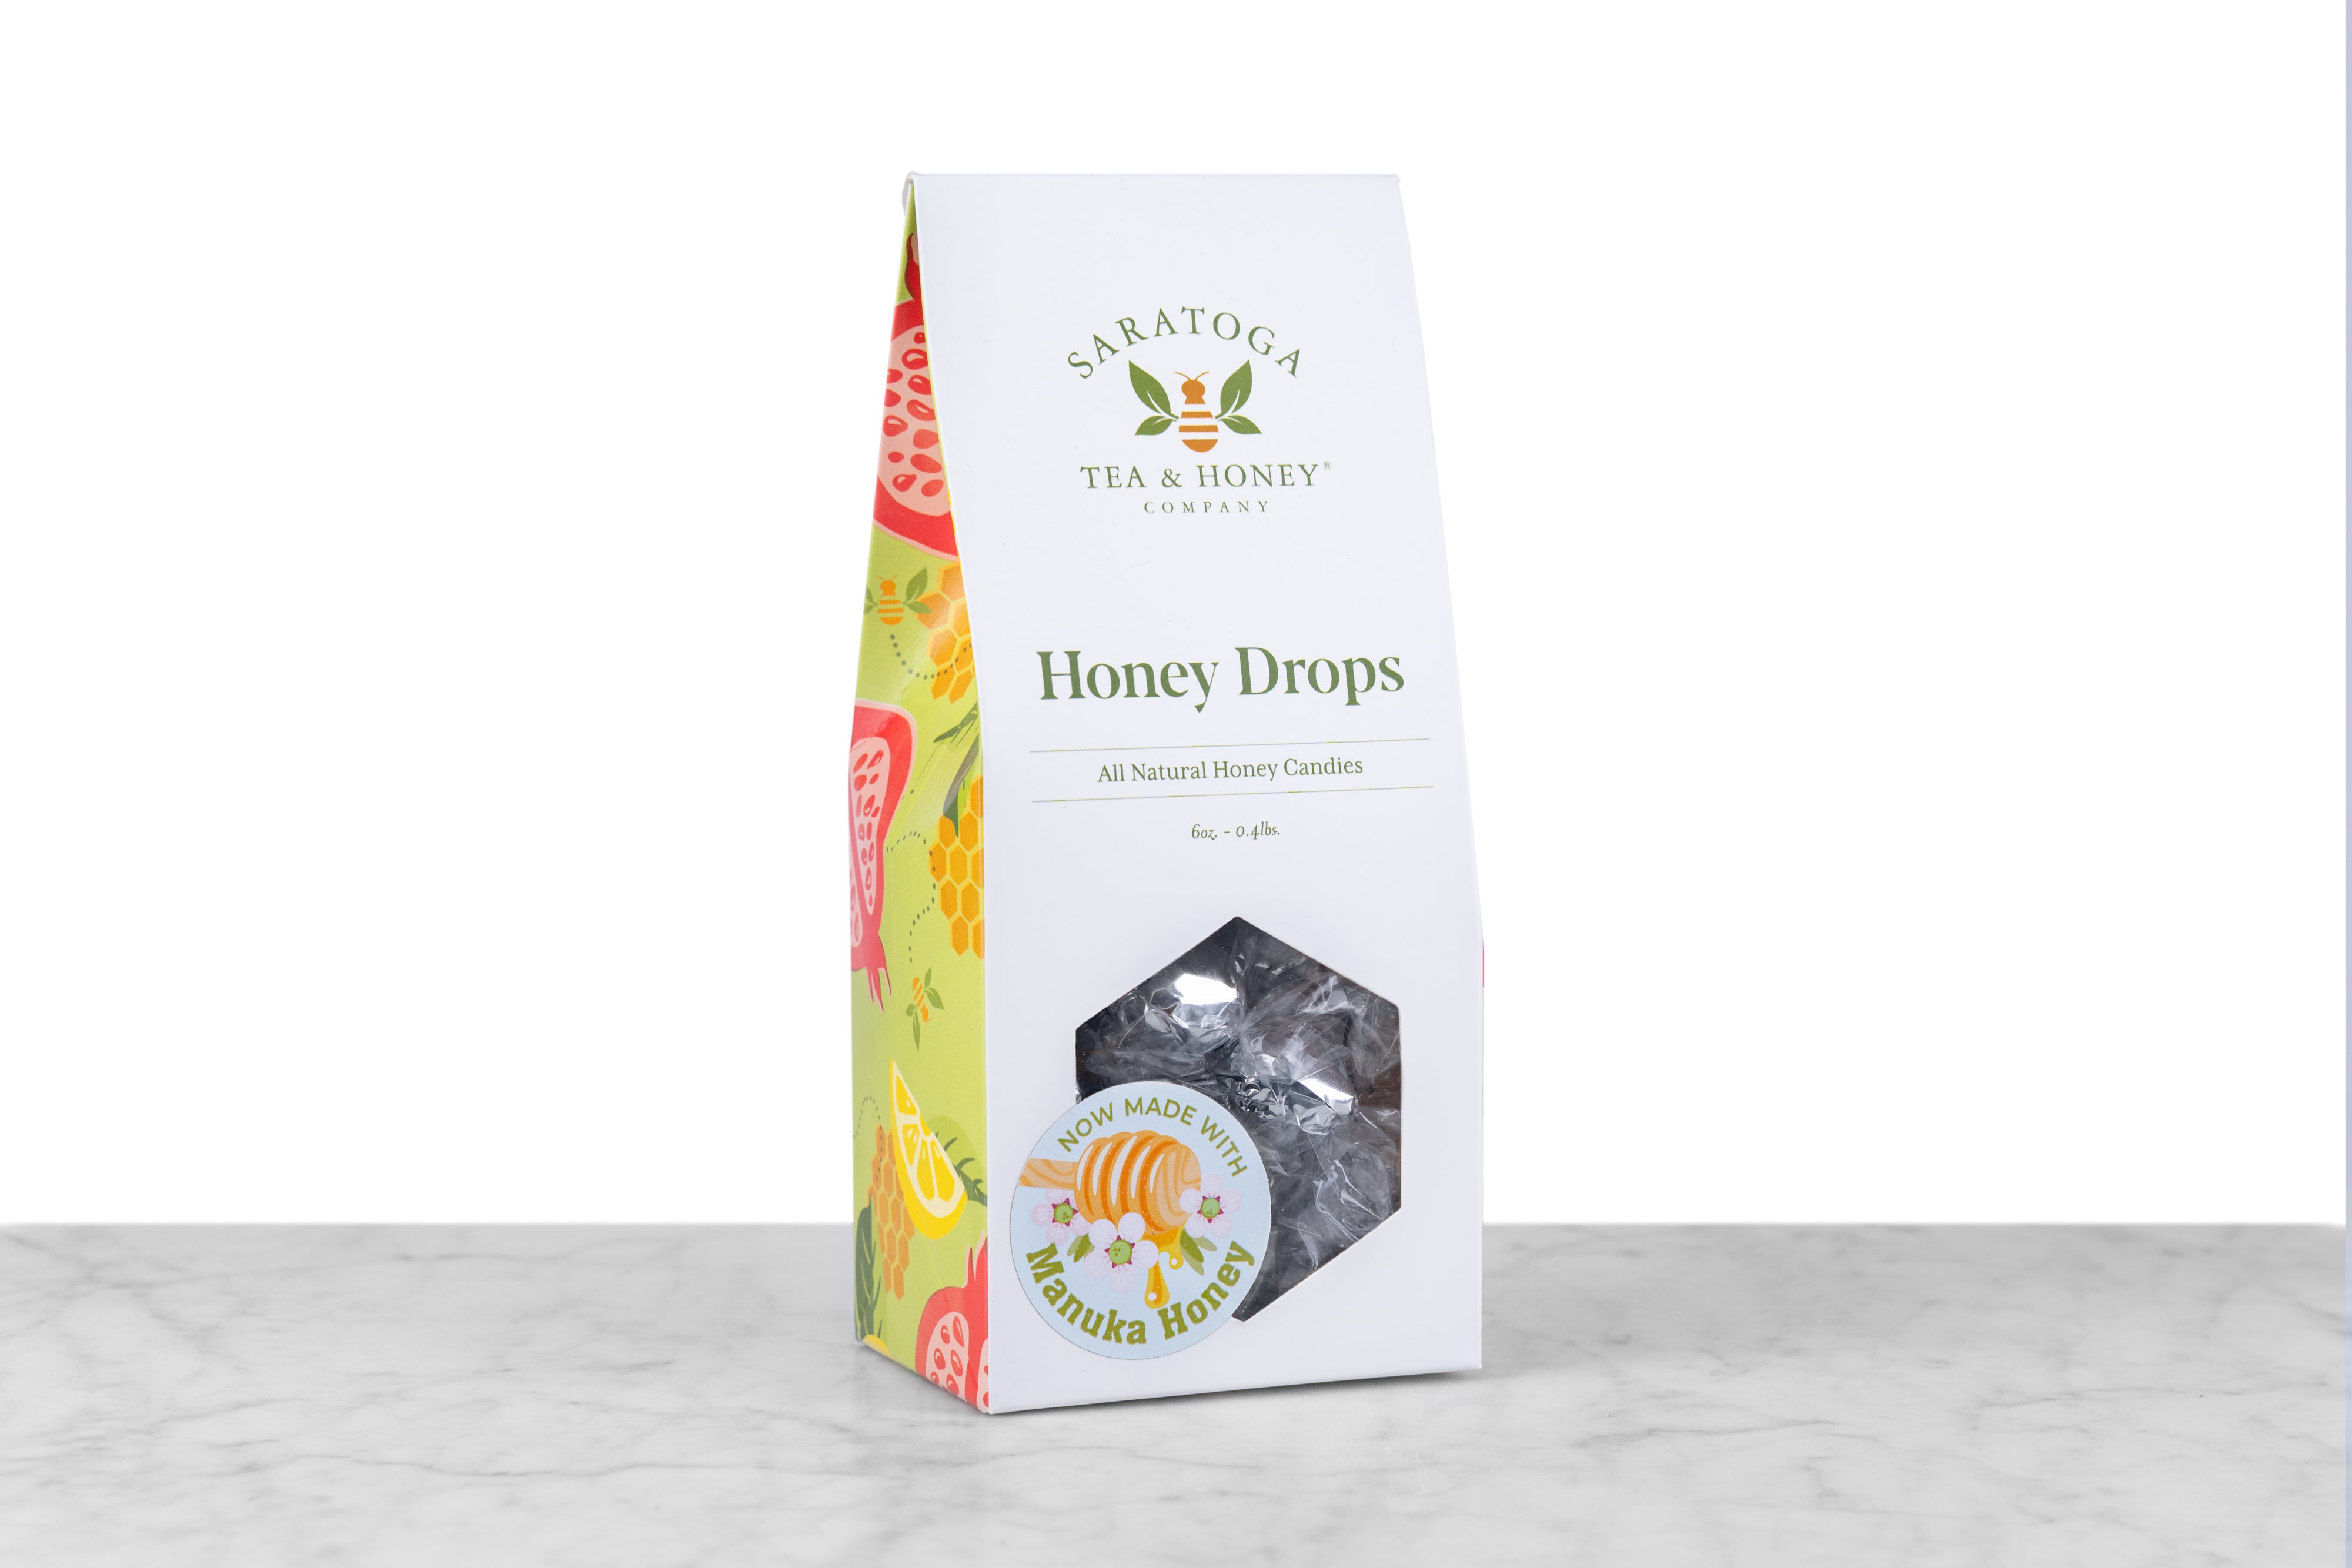 white box with window showing foil wrapped honey drops and a sticker reading now made with manuka honey